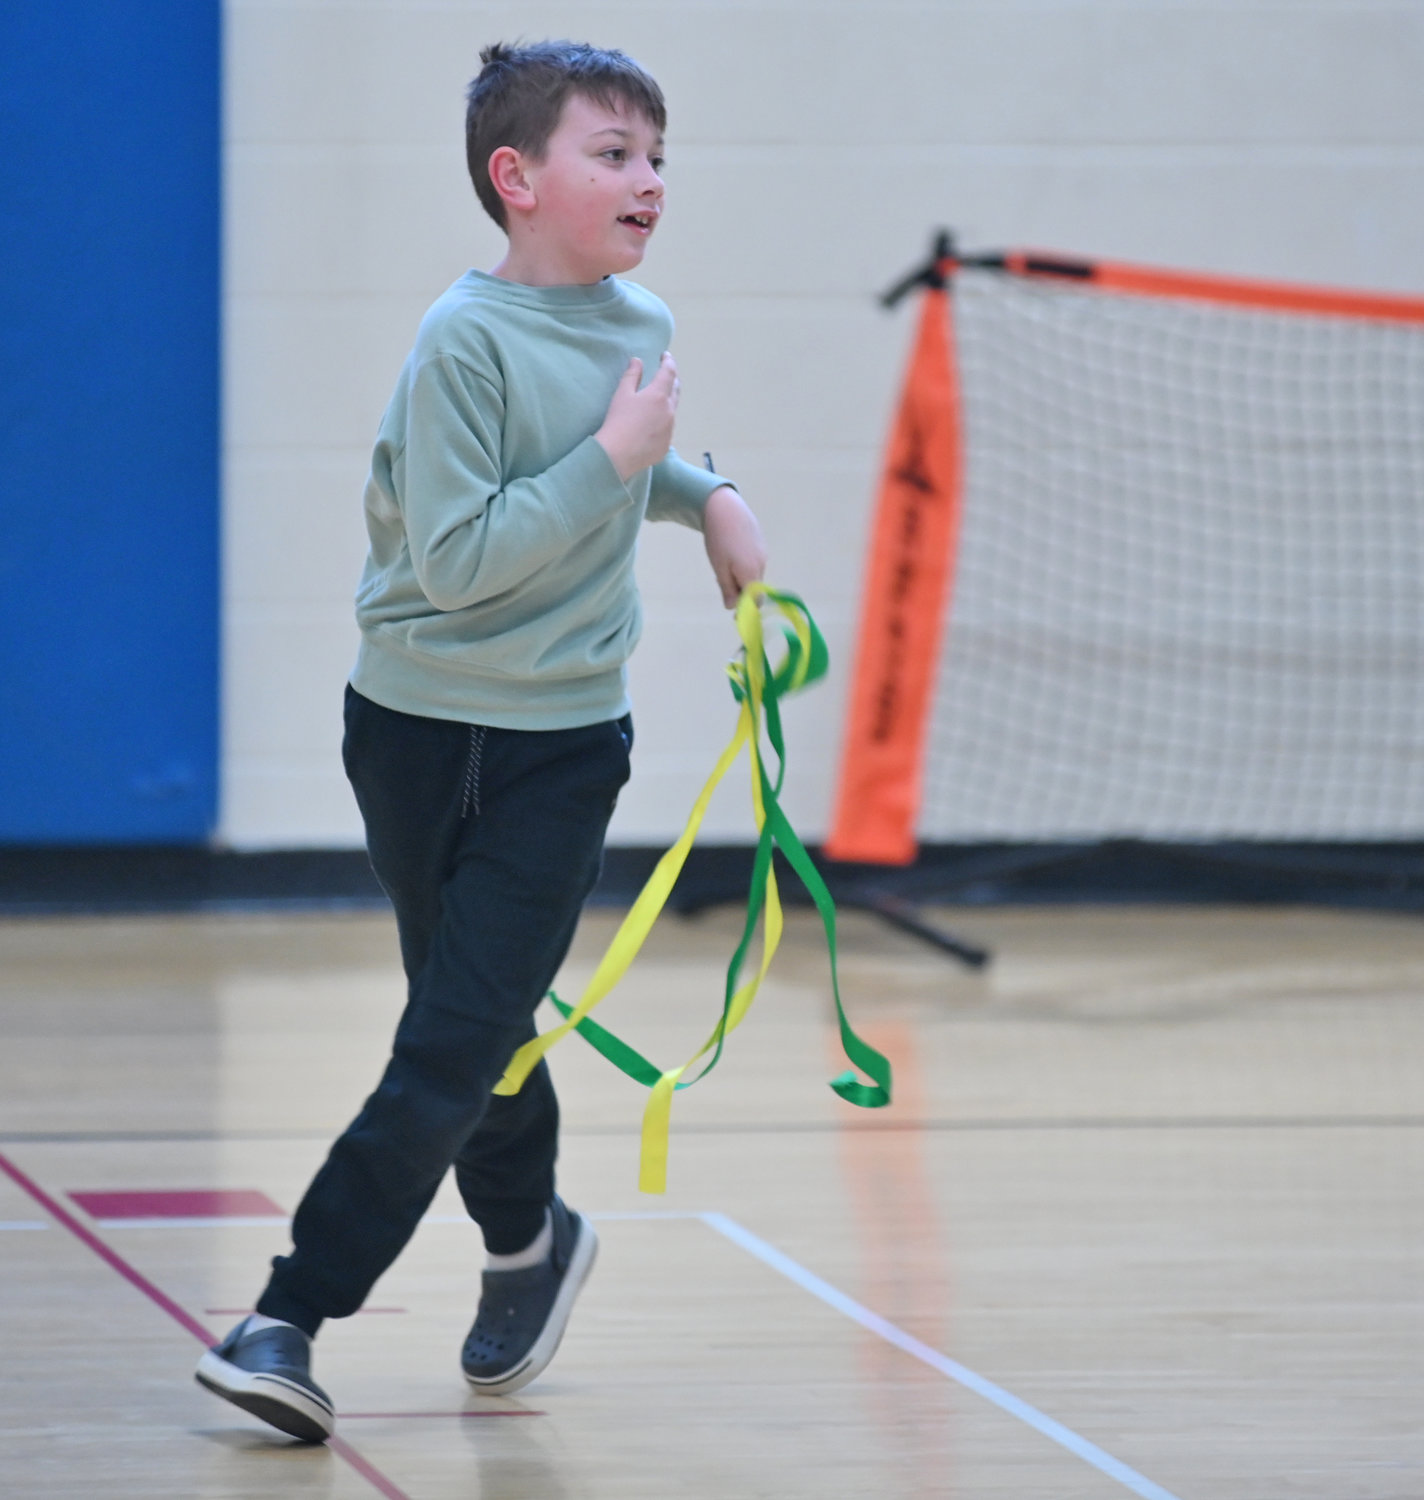 Homeschooler Jack Swartz, 7, plays during Home Zone gym classes Wednesday, Feb. 8 at the YMCA in Oneida.